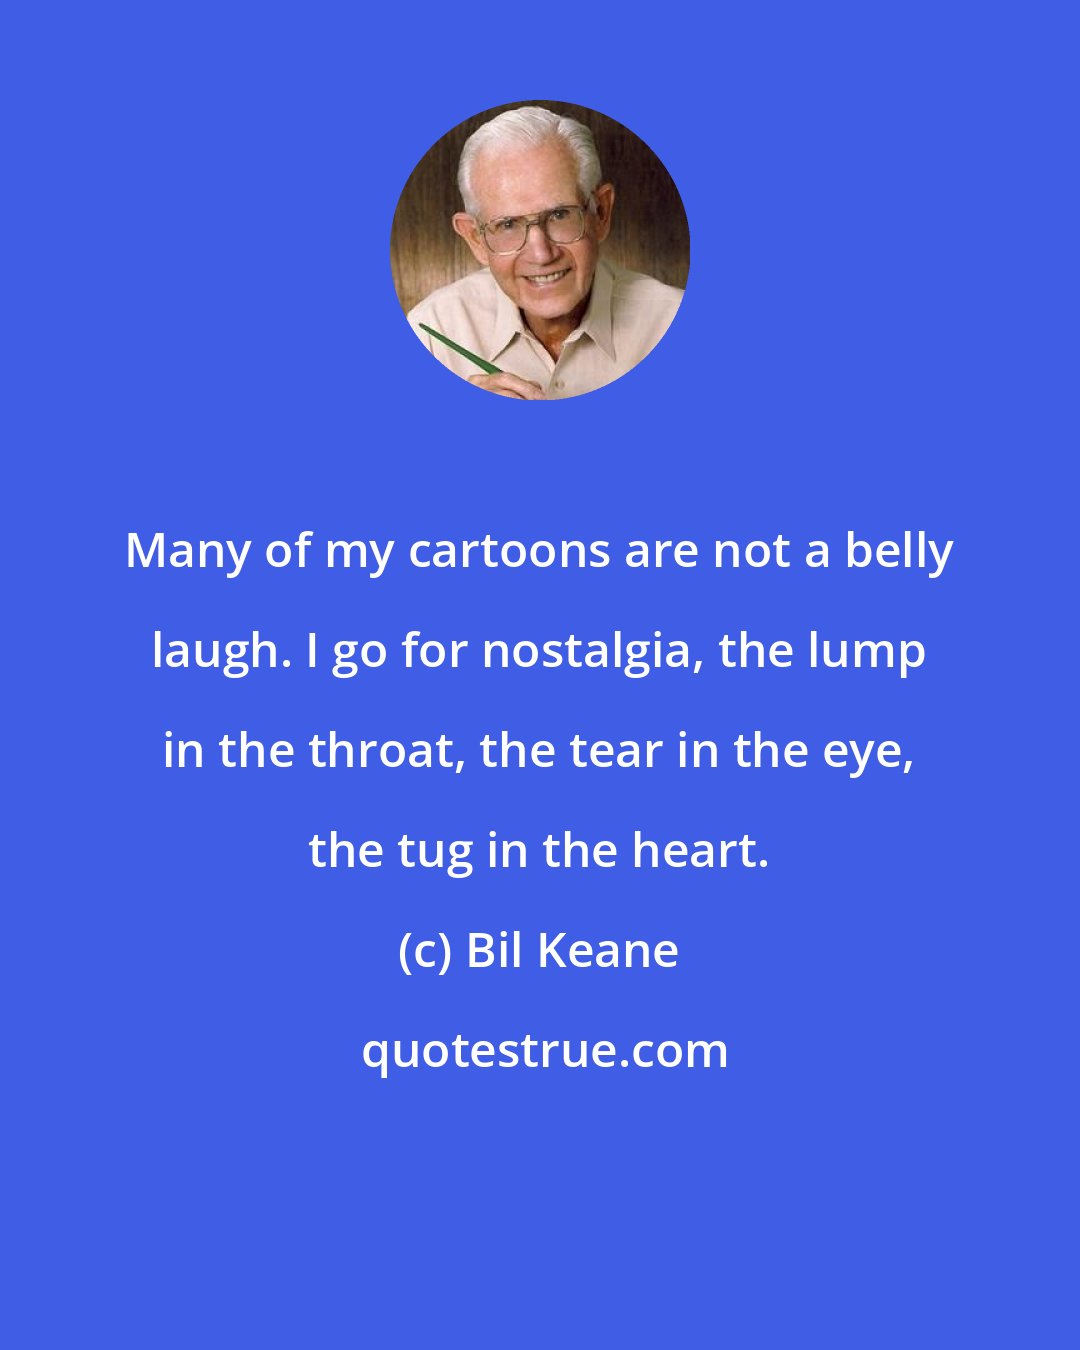 Bil Keane: Many of my cartoons are not a belly laugh. I go for nostalgia, the lump in the throat, the tear in the eye, the tug in the heart.